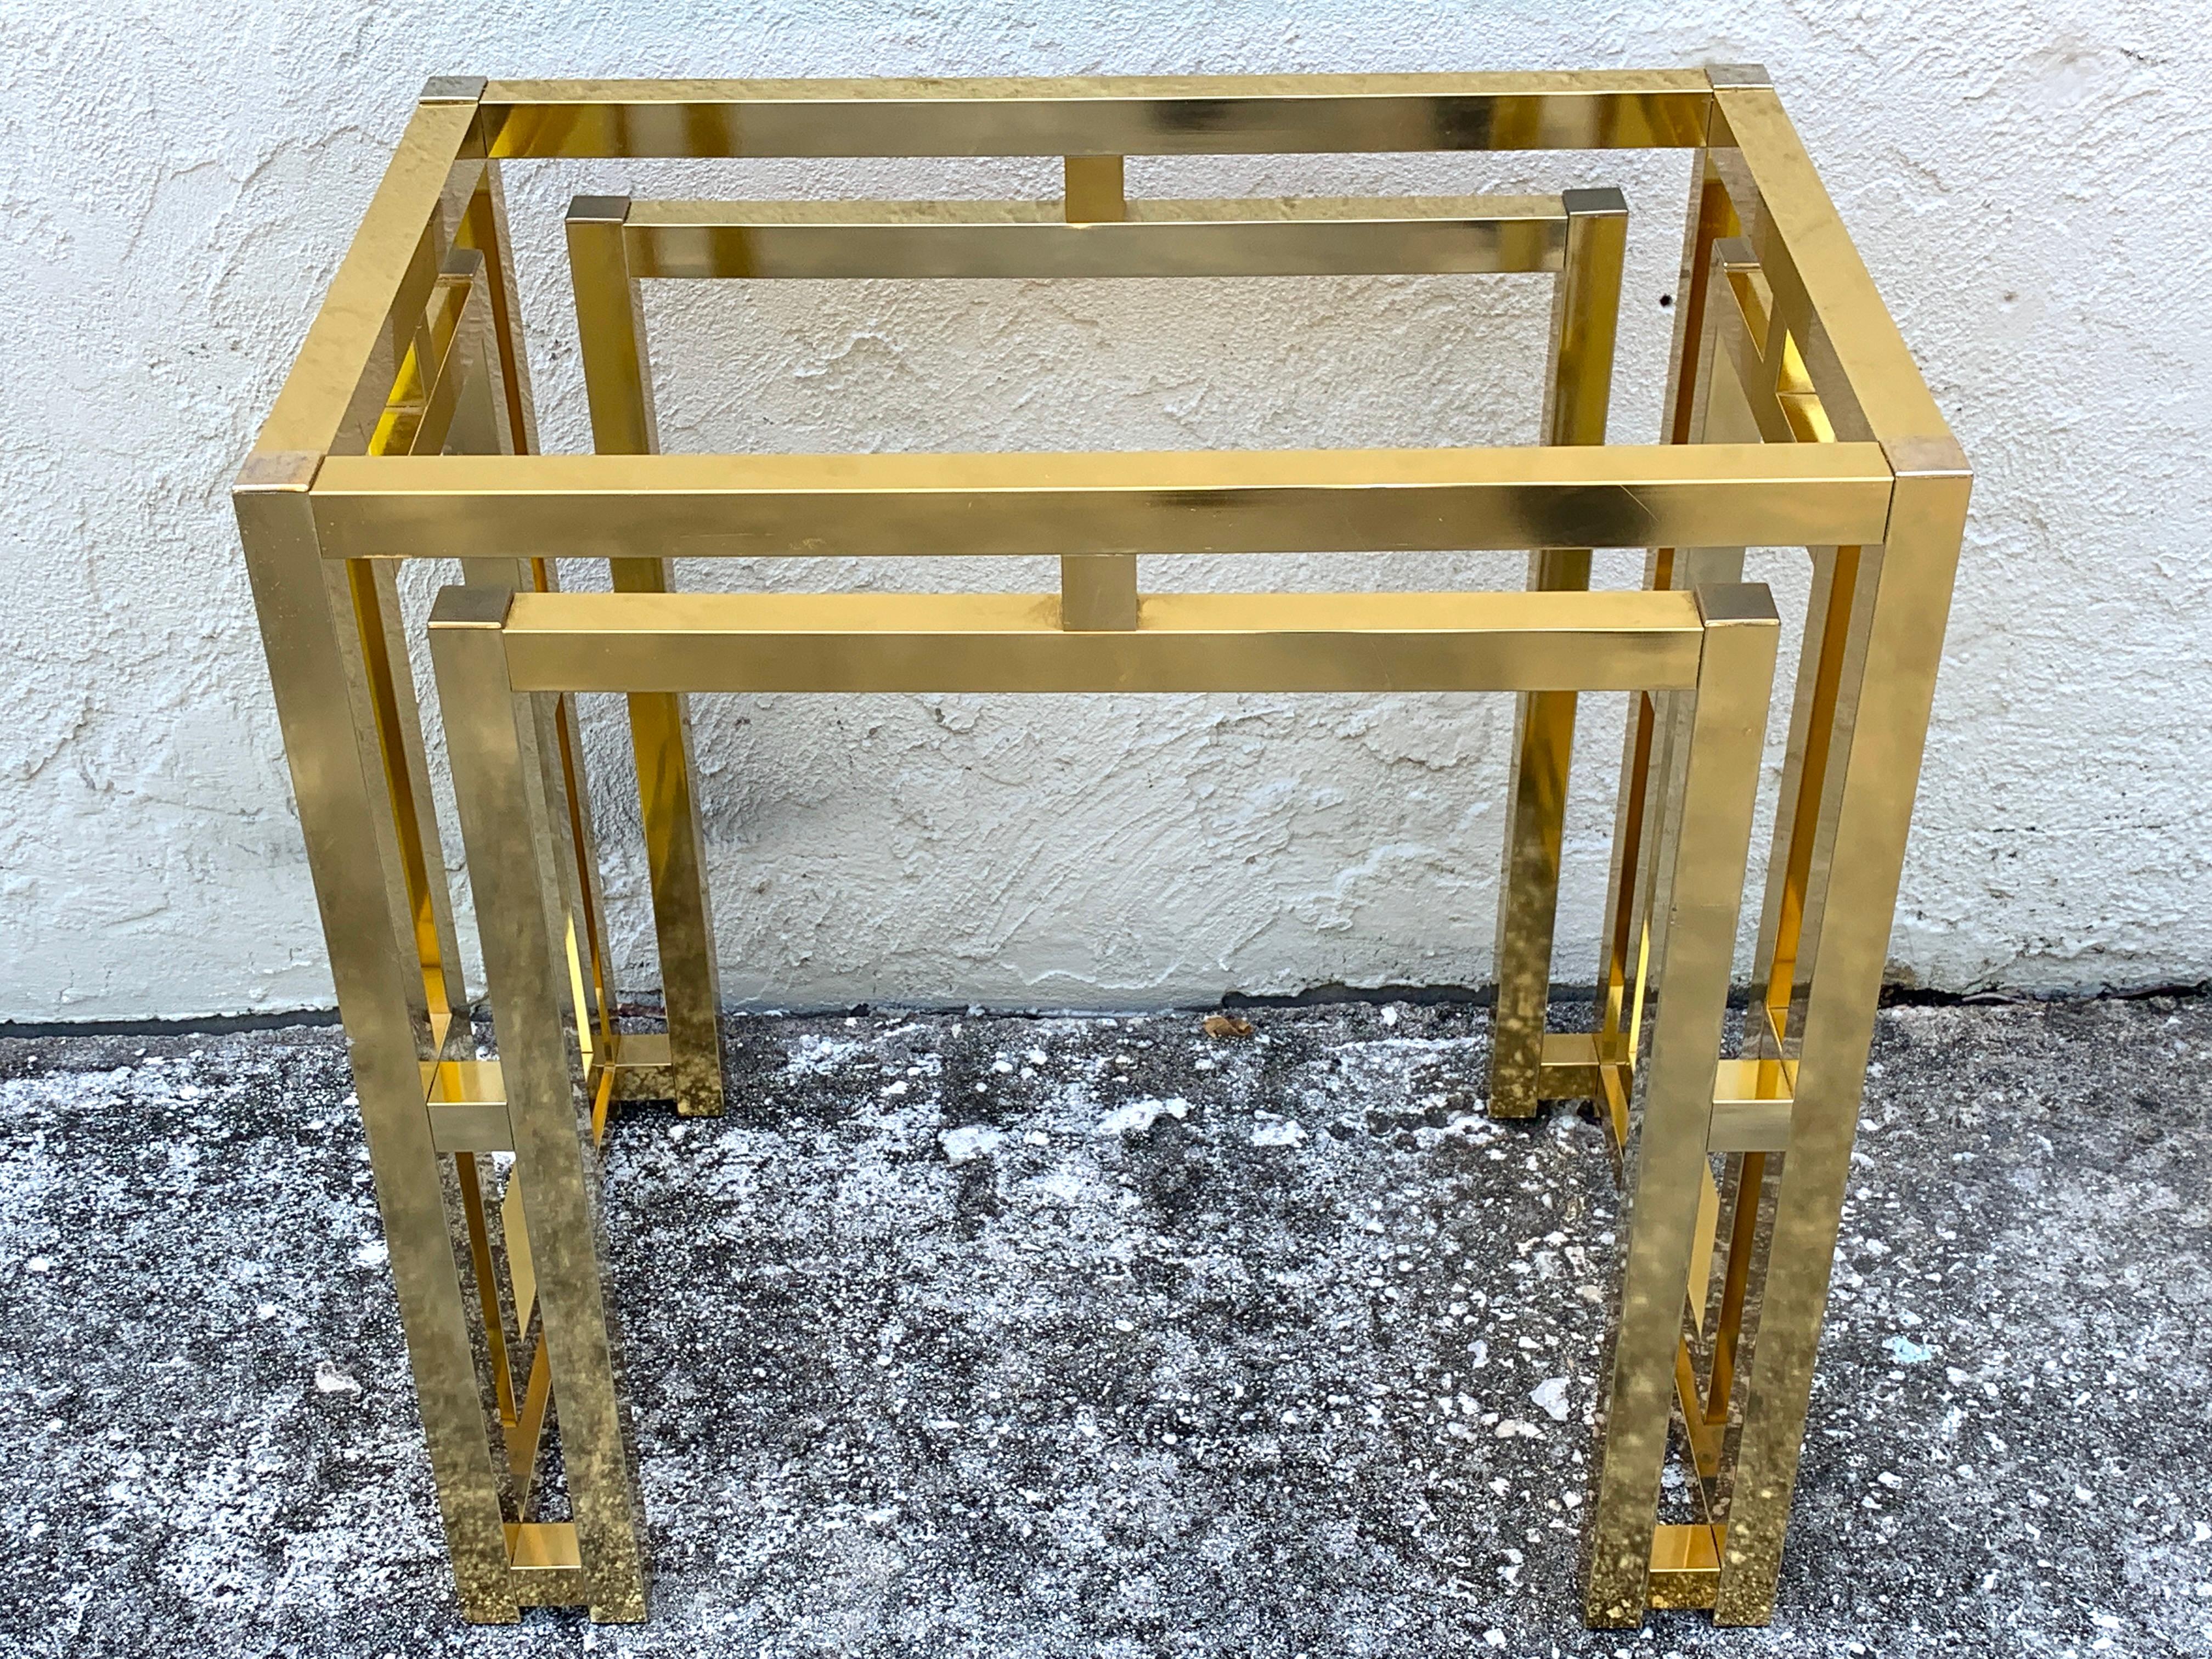 Milo Baughman style brass table base, ready for the glass top of your choice.
FREE LOCAL WHITE GLOVE SHIPPING -PALM BEACH to MIAMI 